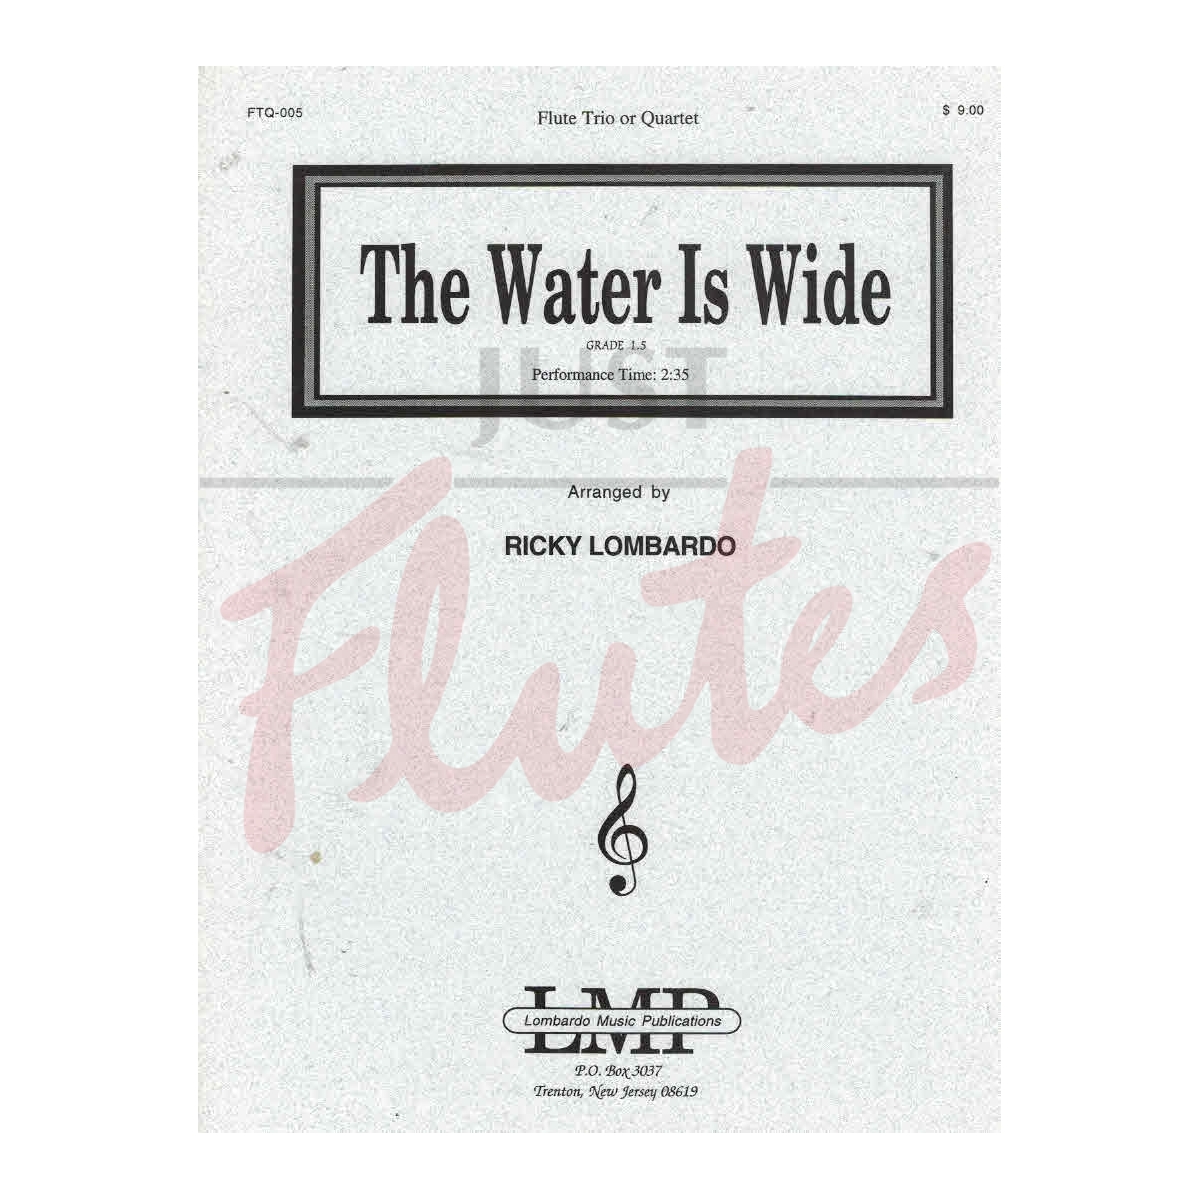 The Water is Wide for Flute Trio or Quartet